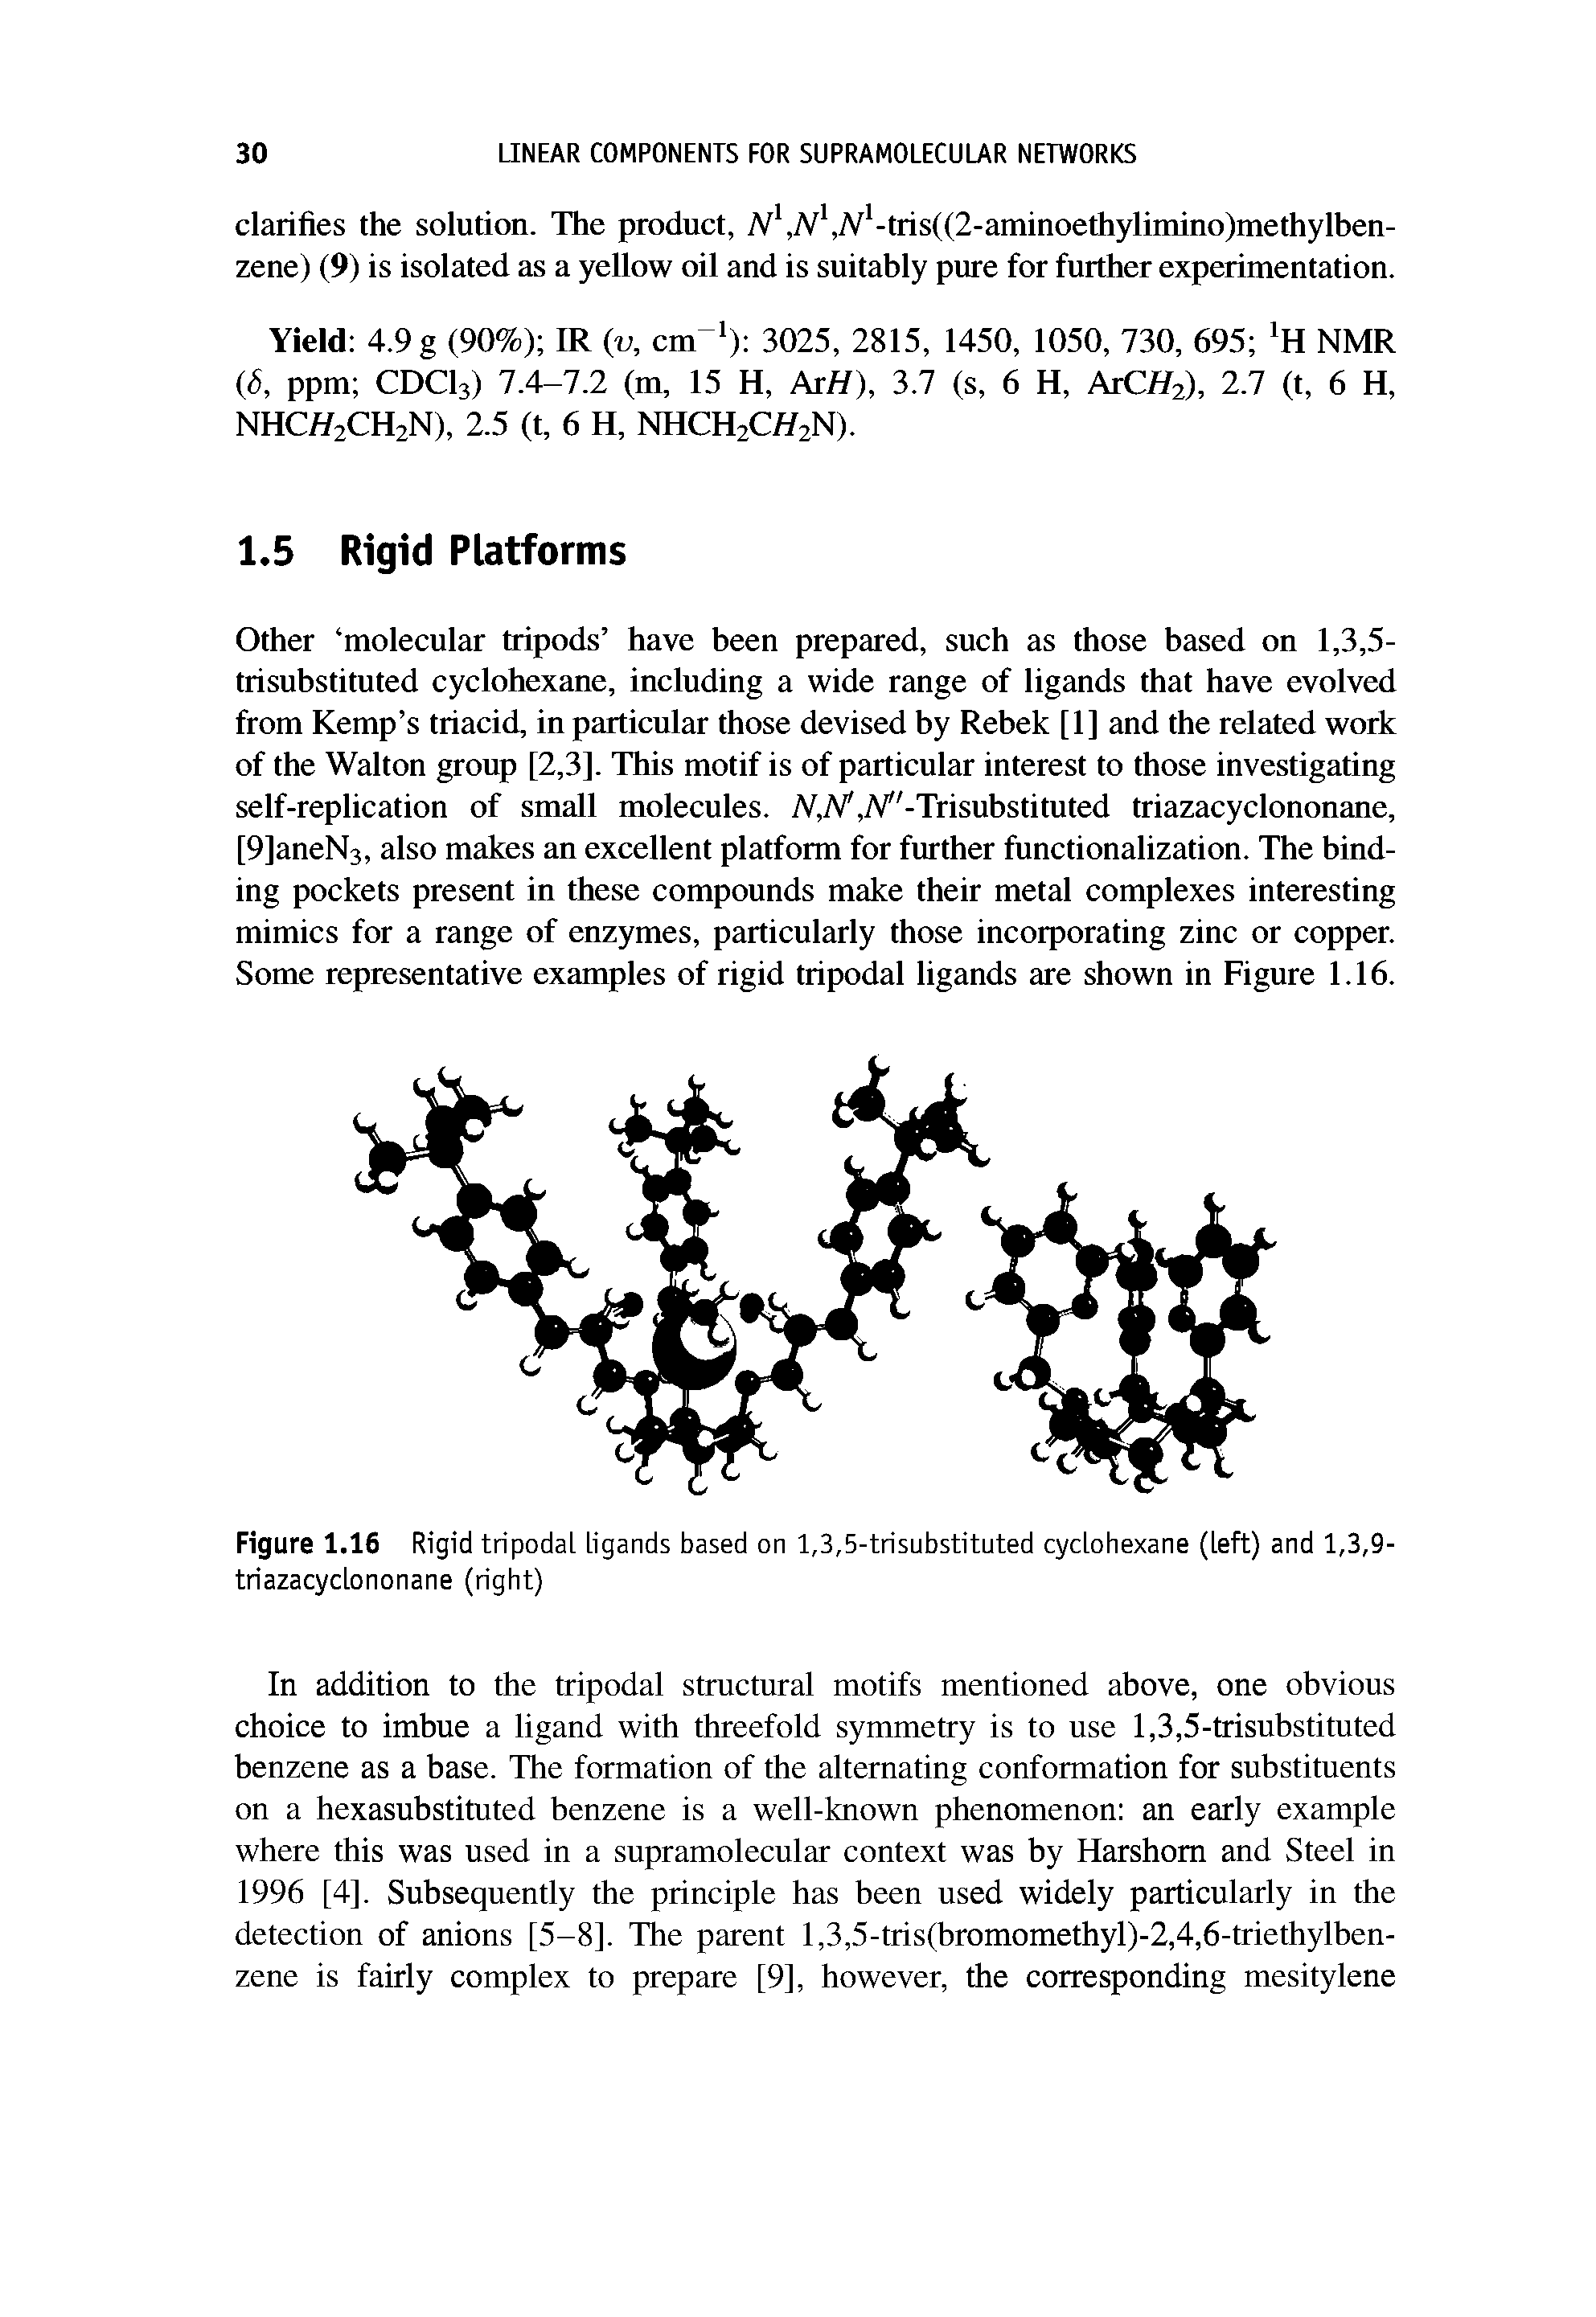 Figure 1.16 Rigid tripodai Ligands based on 1,3,5-trisubstituted cyclohexane (Left) and 1,3,9-triazacycLononane (right)...